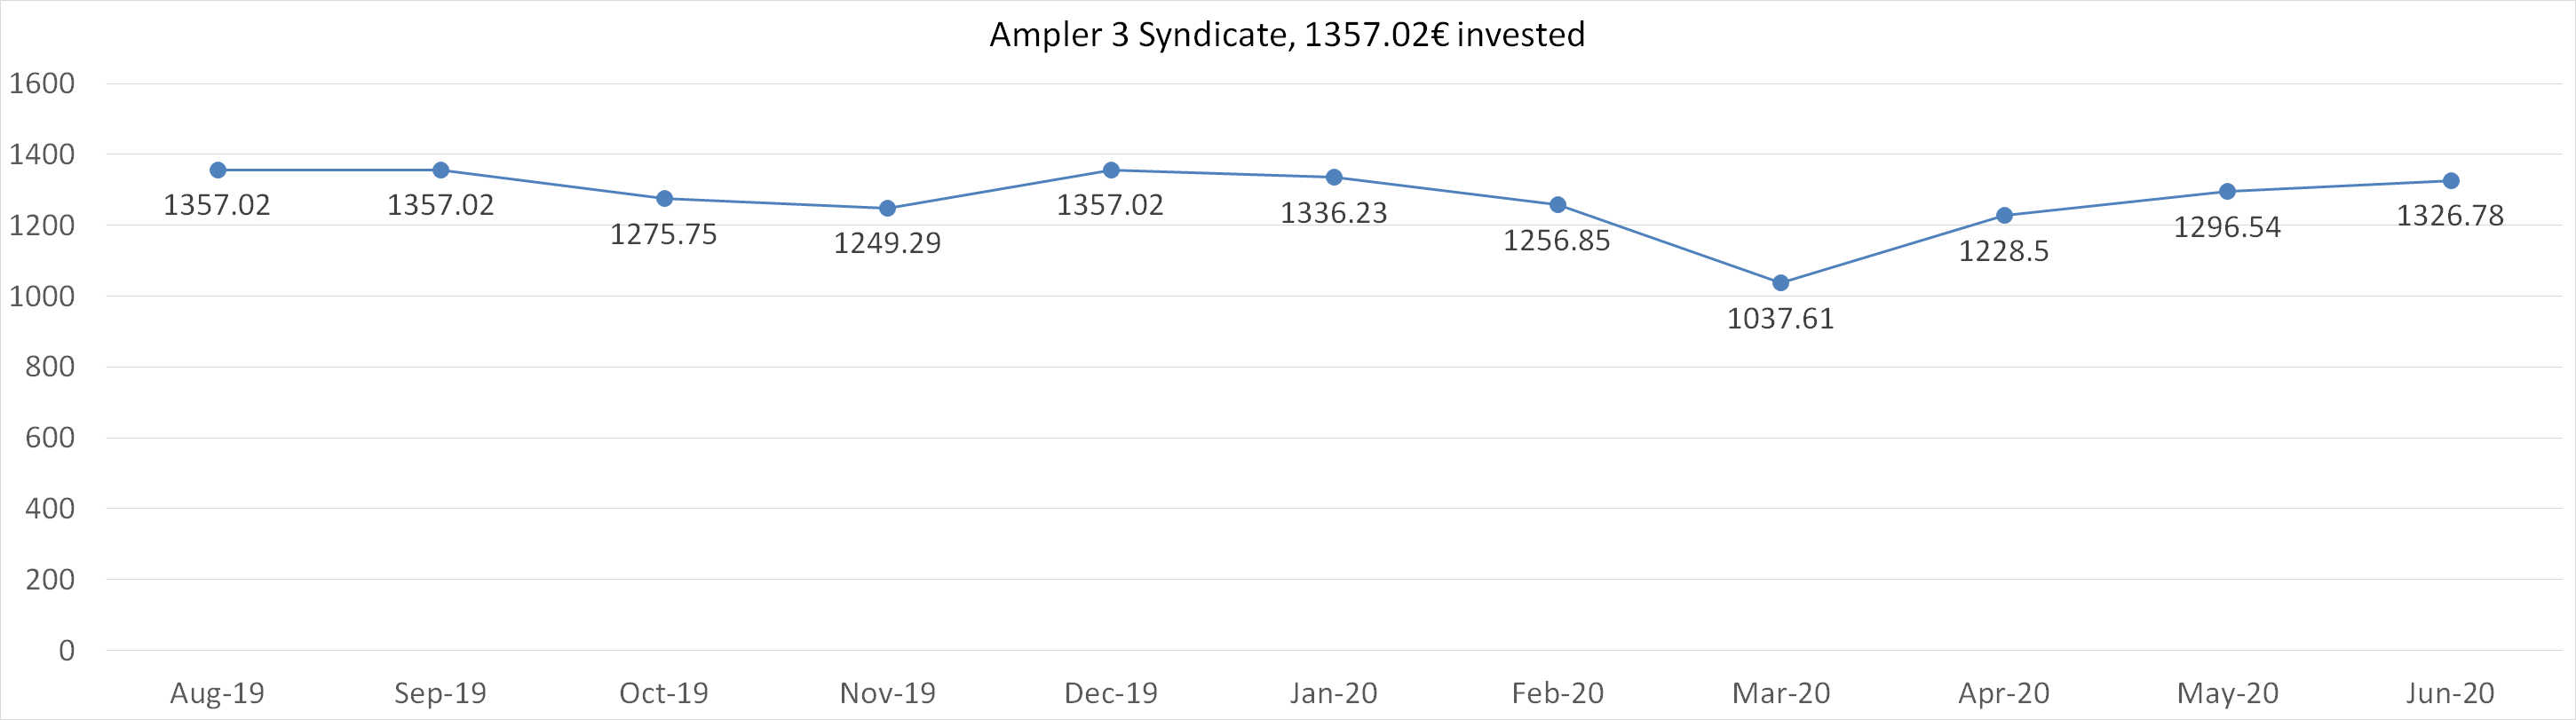 Ampler 3 syndicate worth june 2020